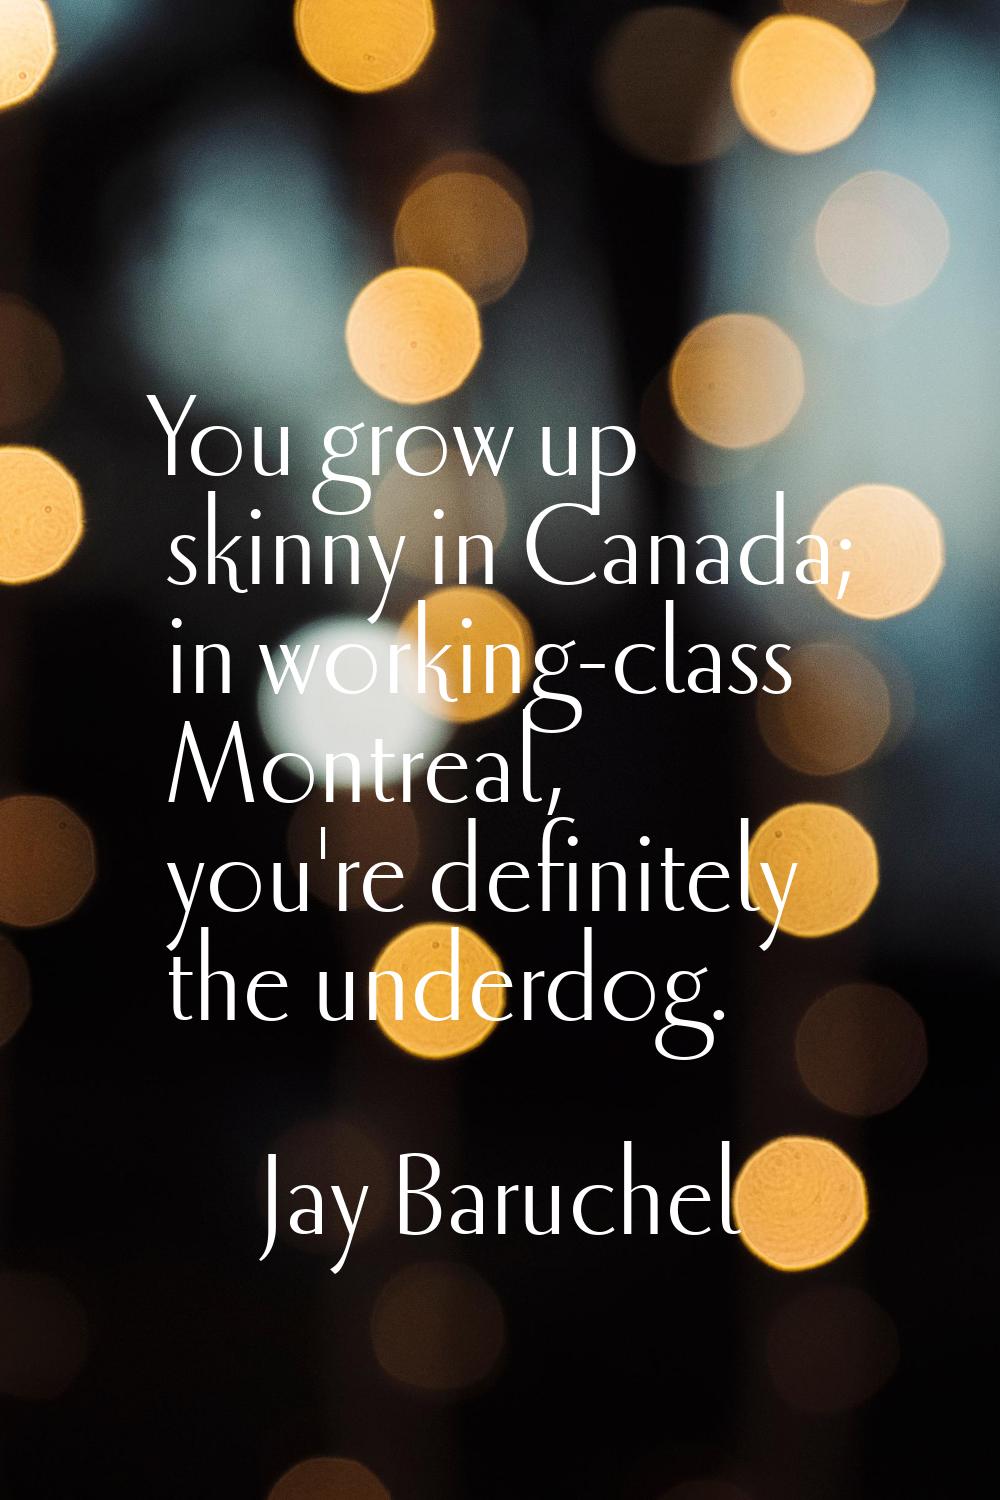 You grow up skinny in Canada; in working-class Montreal, you're definitely the underdog.